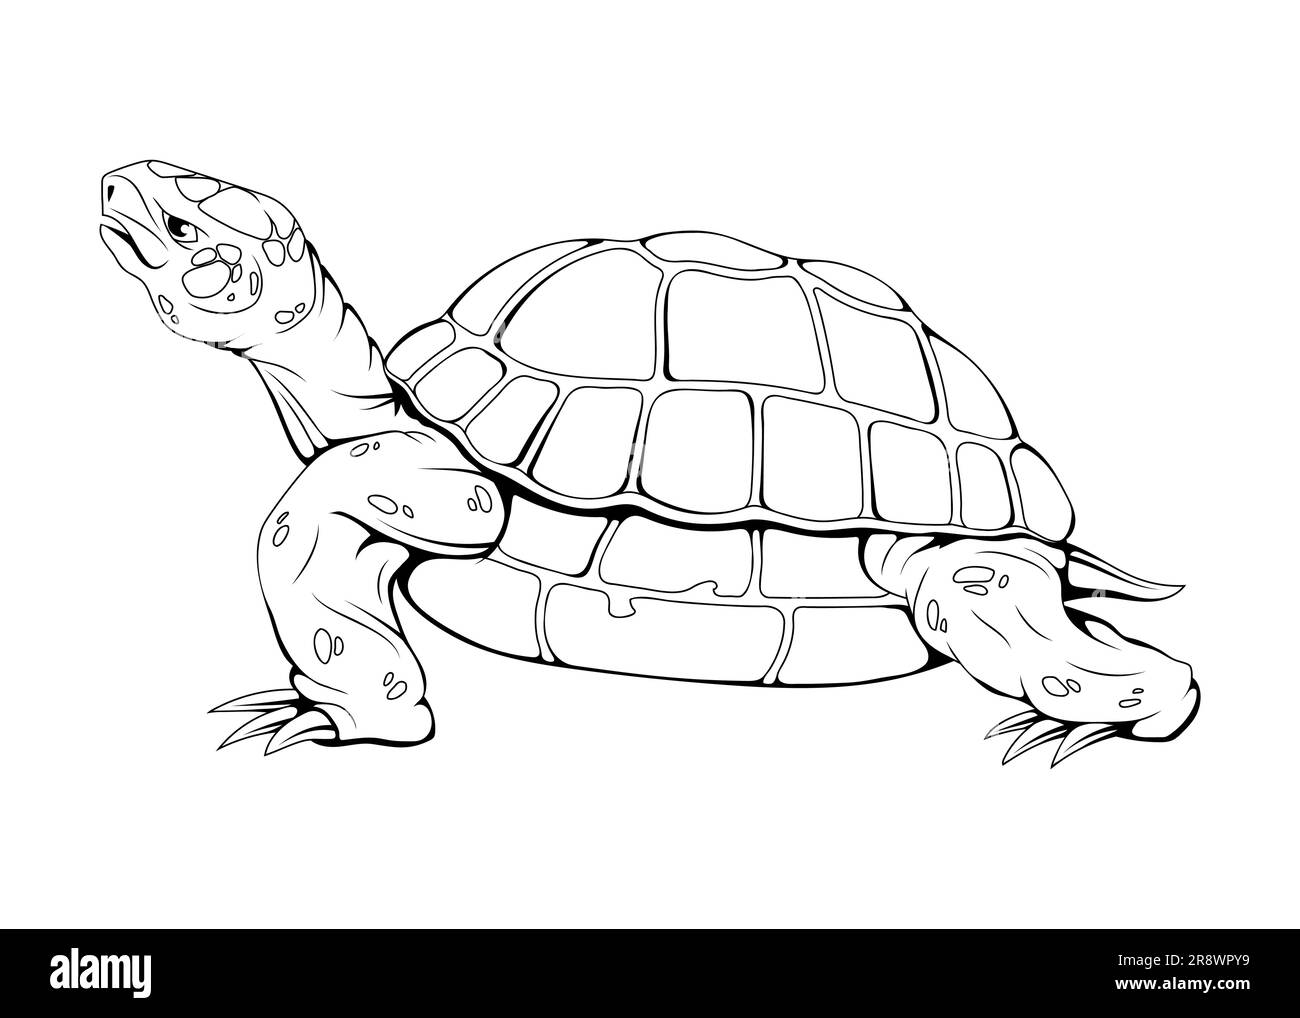 Sea turtle. Vector illustration of a sketch marine animals. Save a turtle Stock Vector